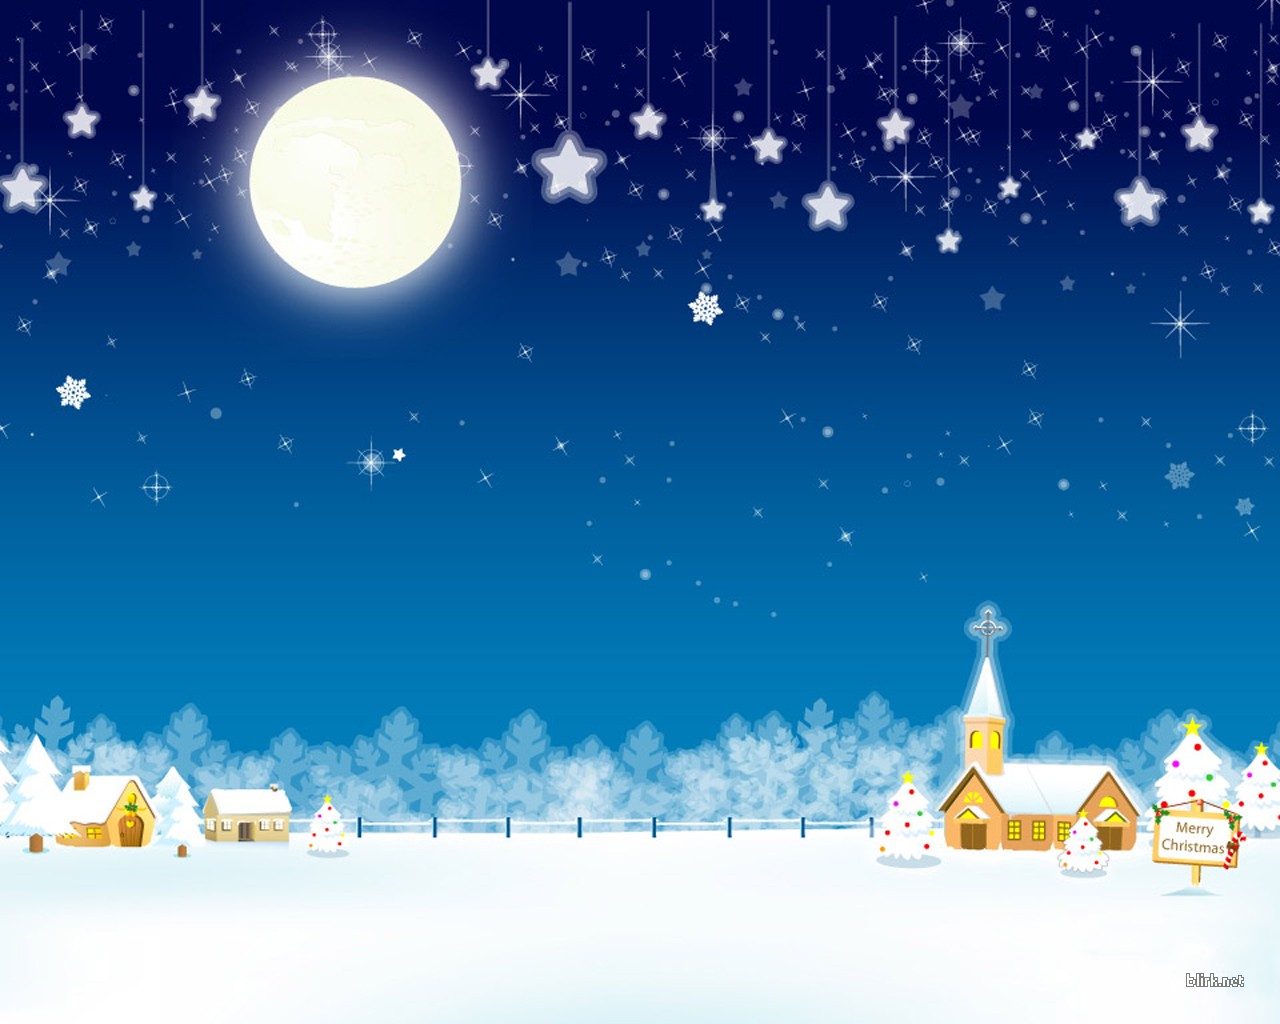 Christmas Snow Wallpaper 9694 Hd Wallpapers in Celebrations   Imagesci 1280x1024